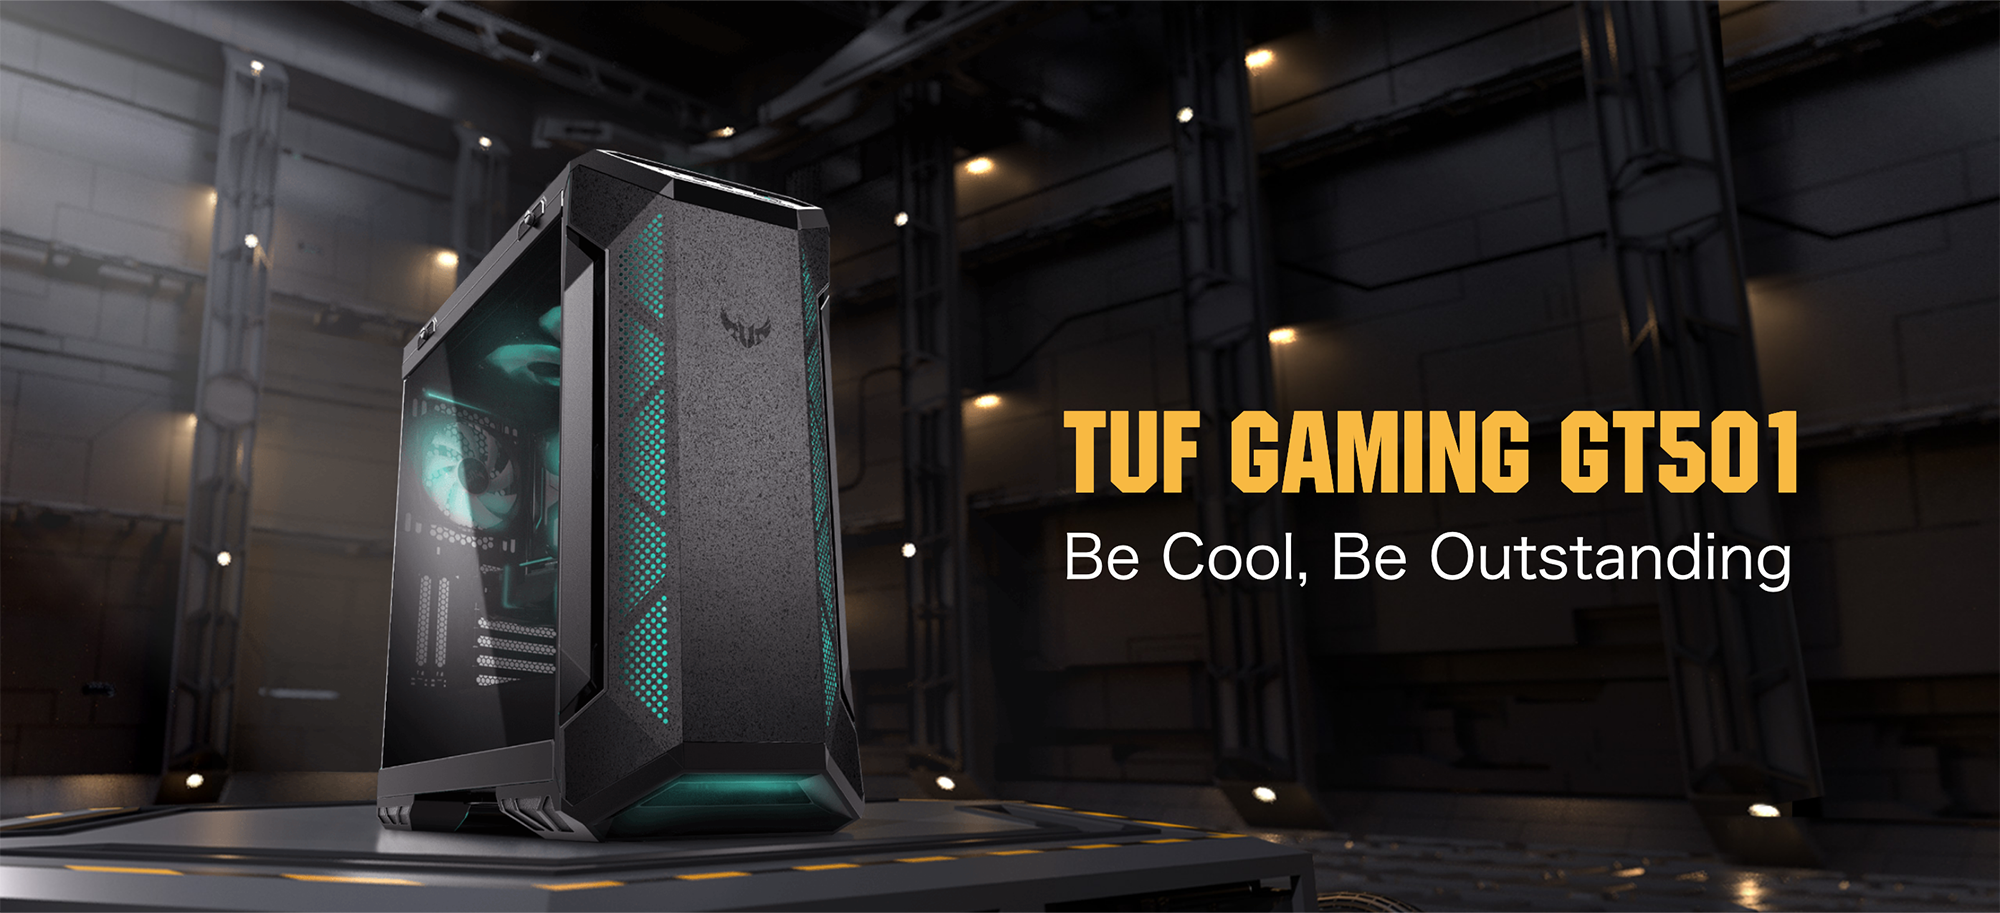 TUF Gaming GT501 Be Cool, Be Outstanding